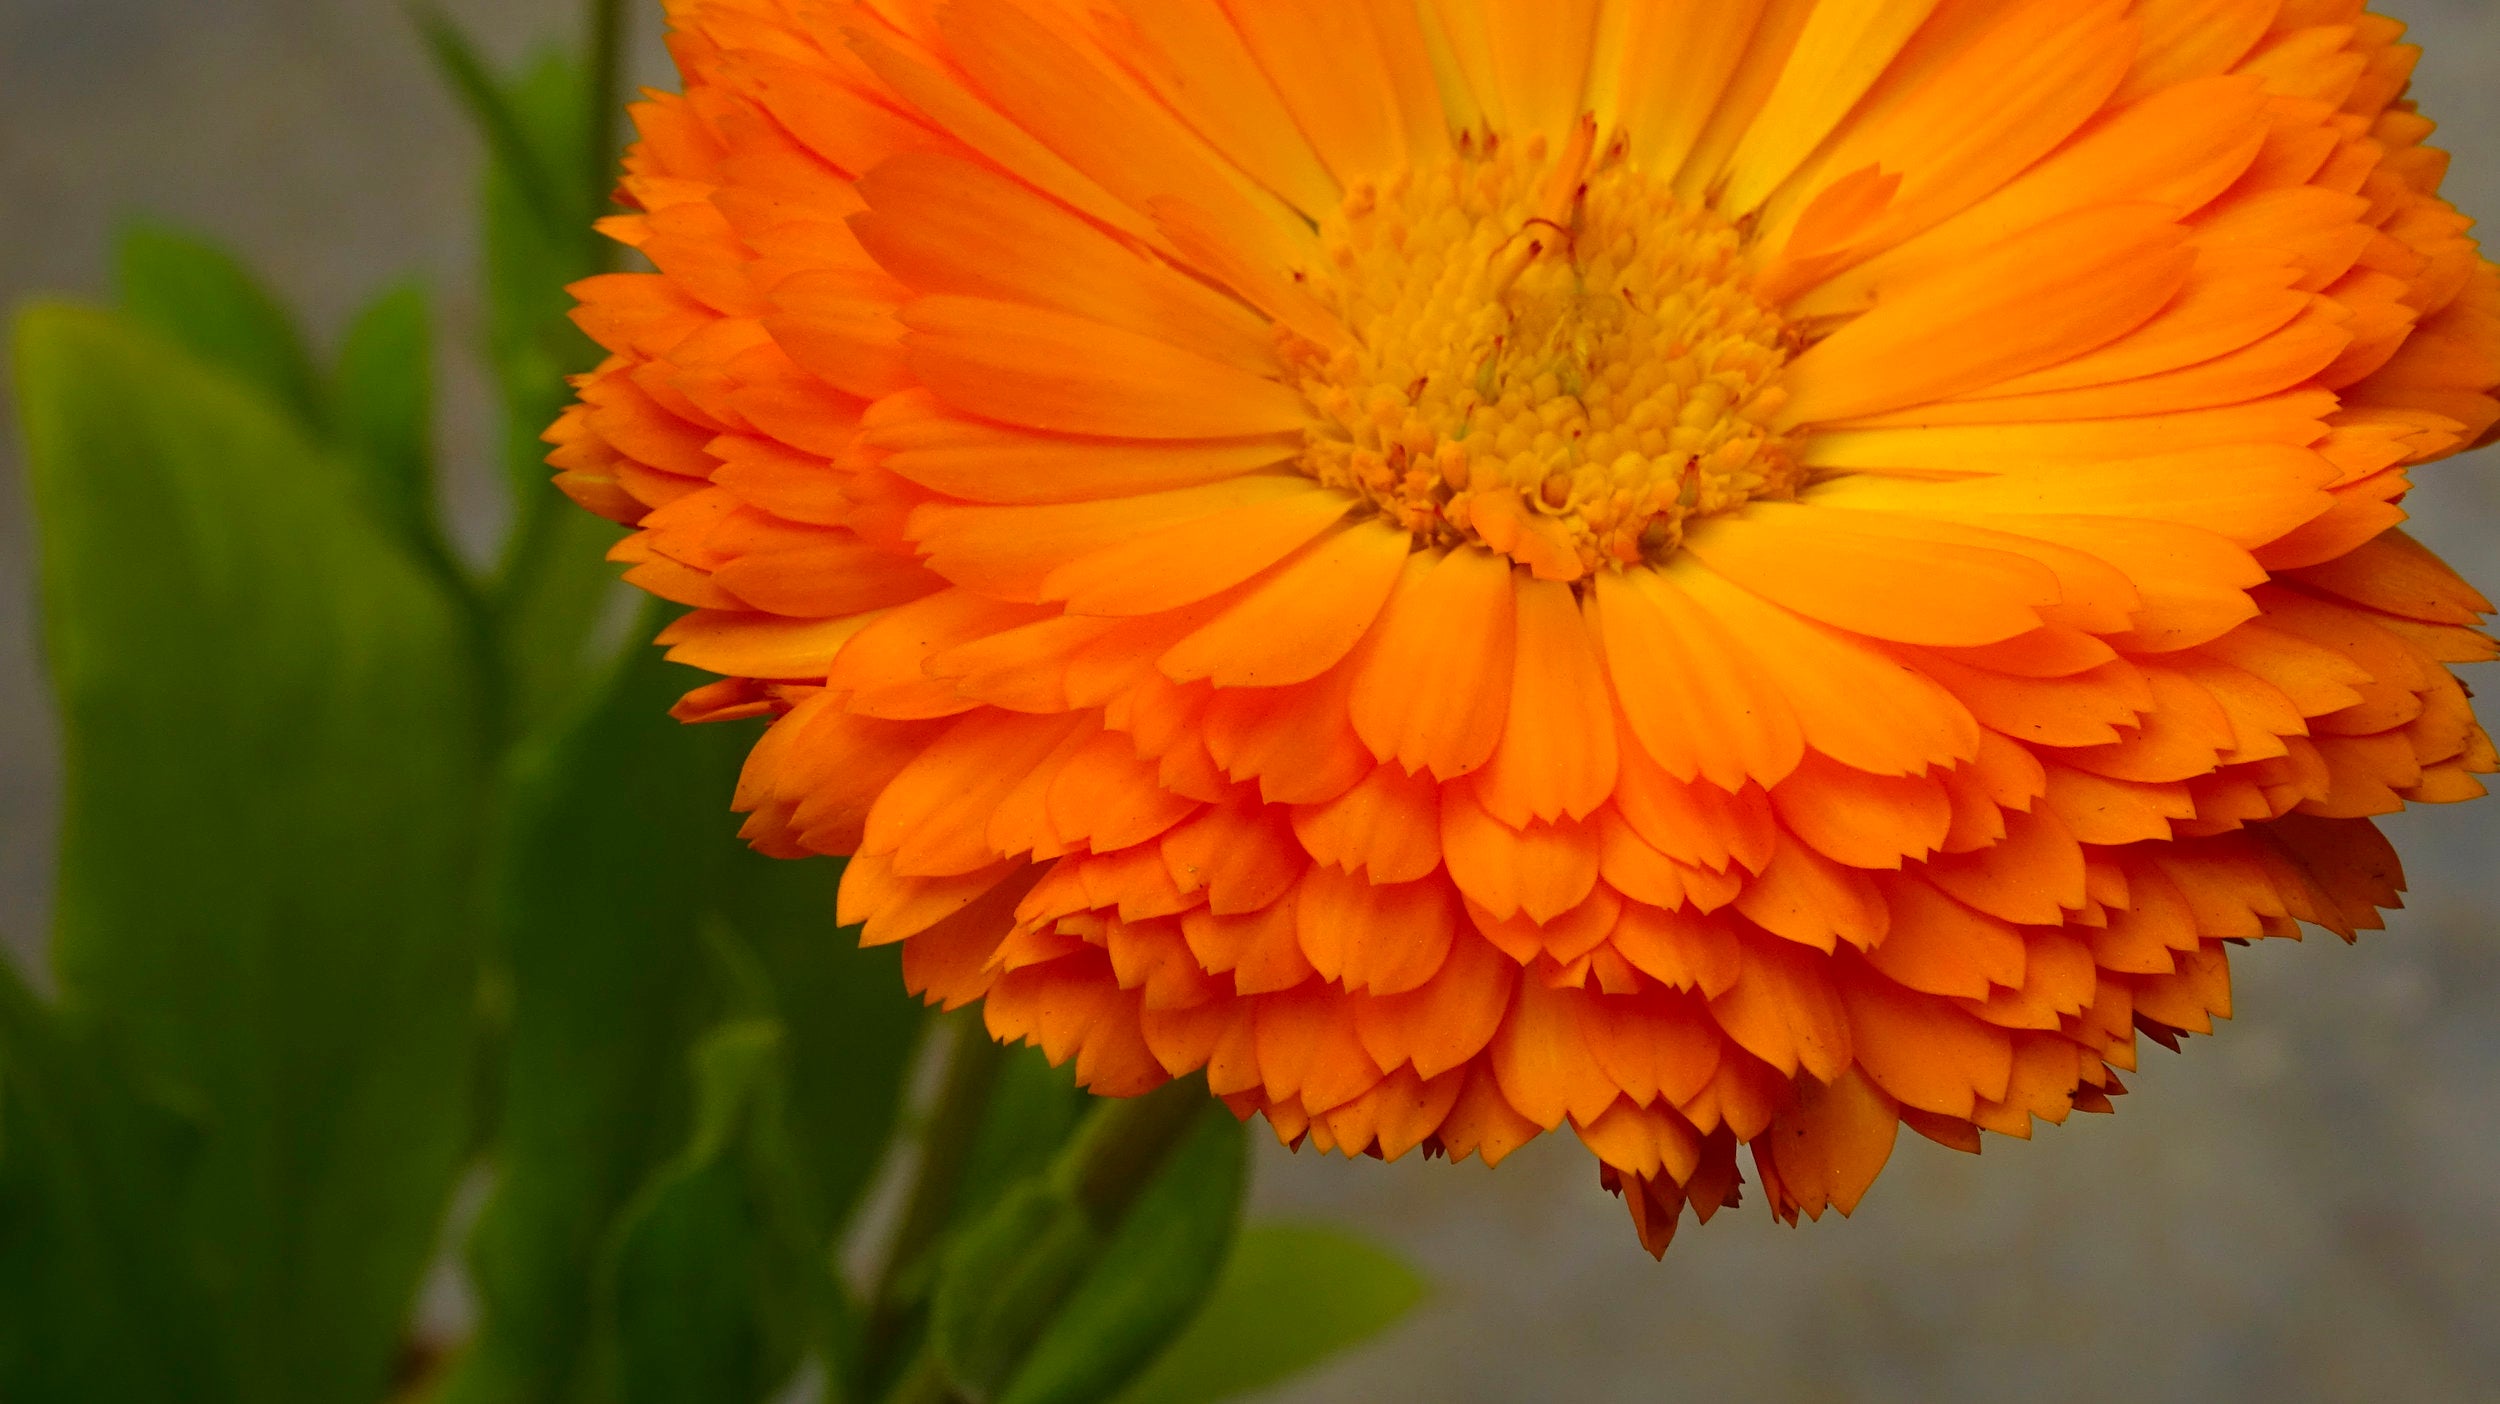 What is Calendula All About Anyway?